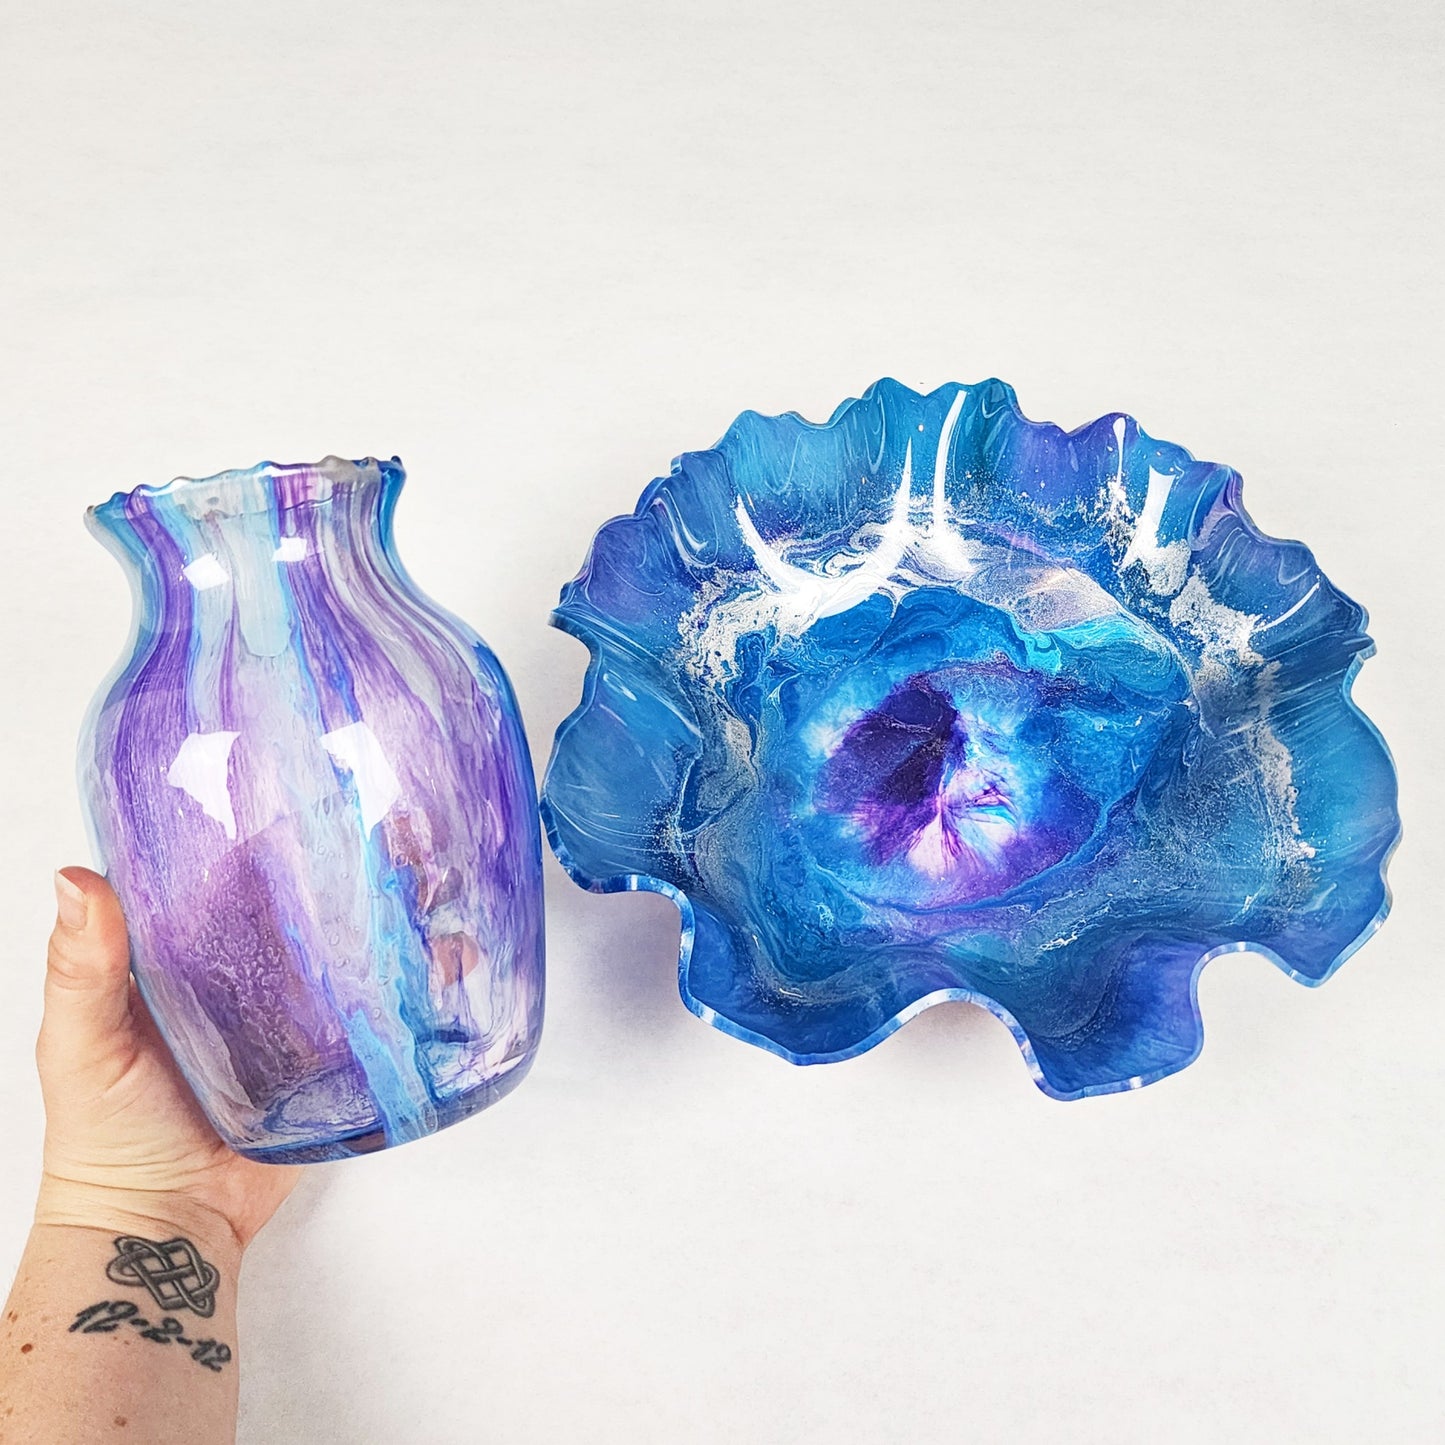 NEW Resin Vase and Bowl Kit and Class PRE-ORDER